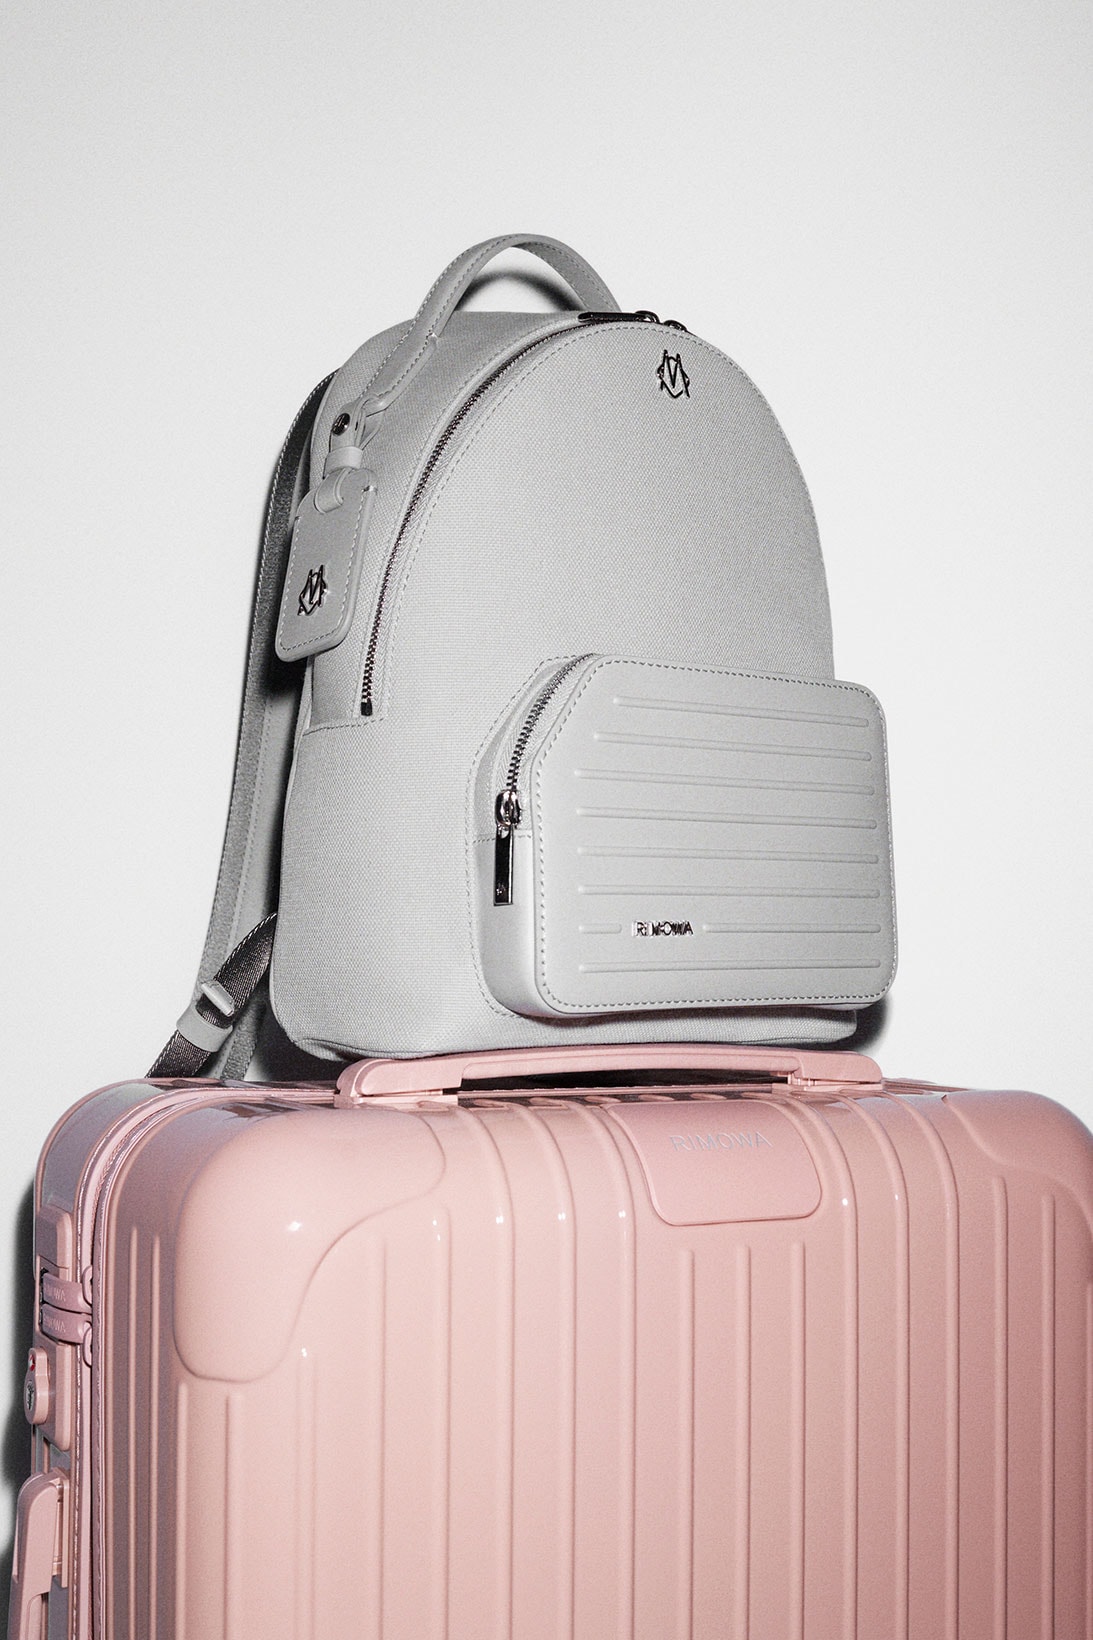 rimowa never still handbags backpacks totes collection pink gray yellow price release